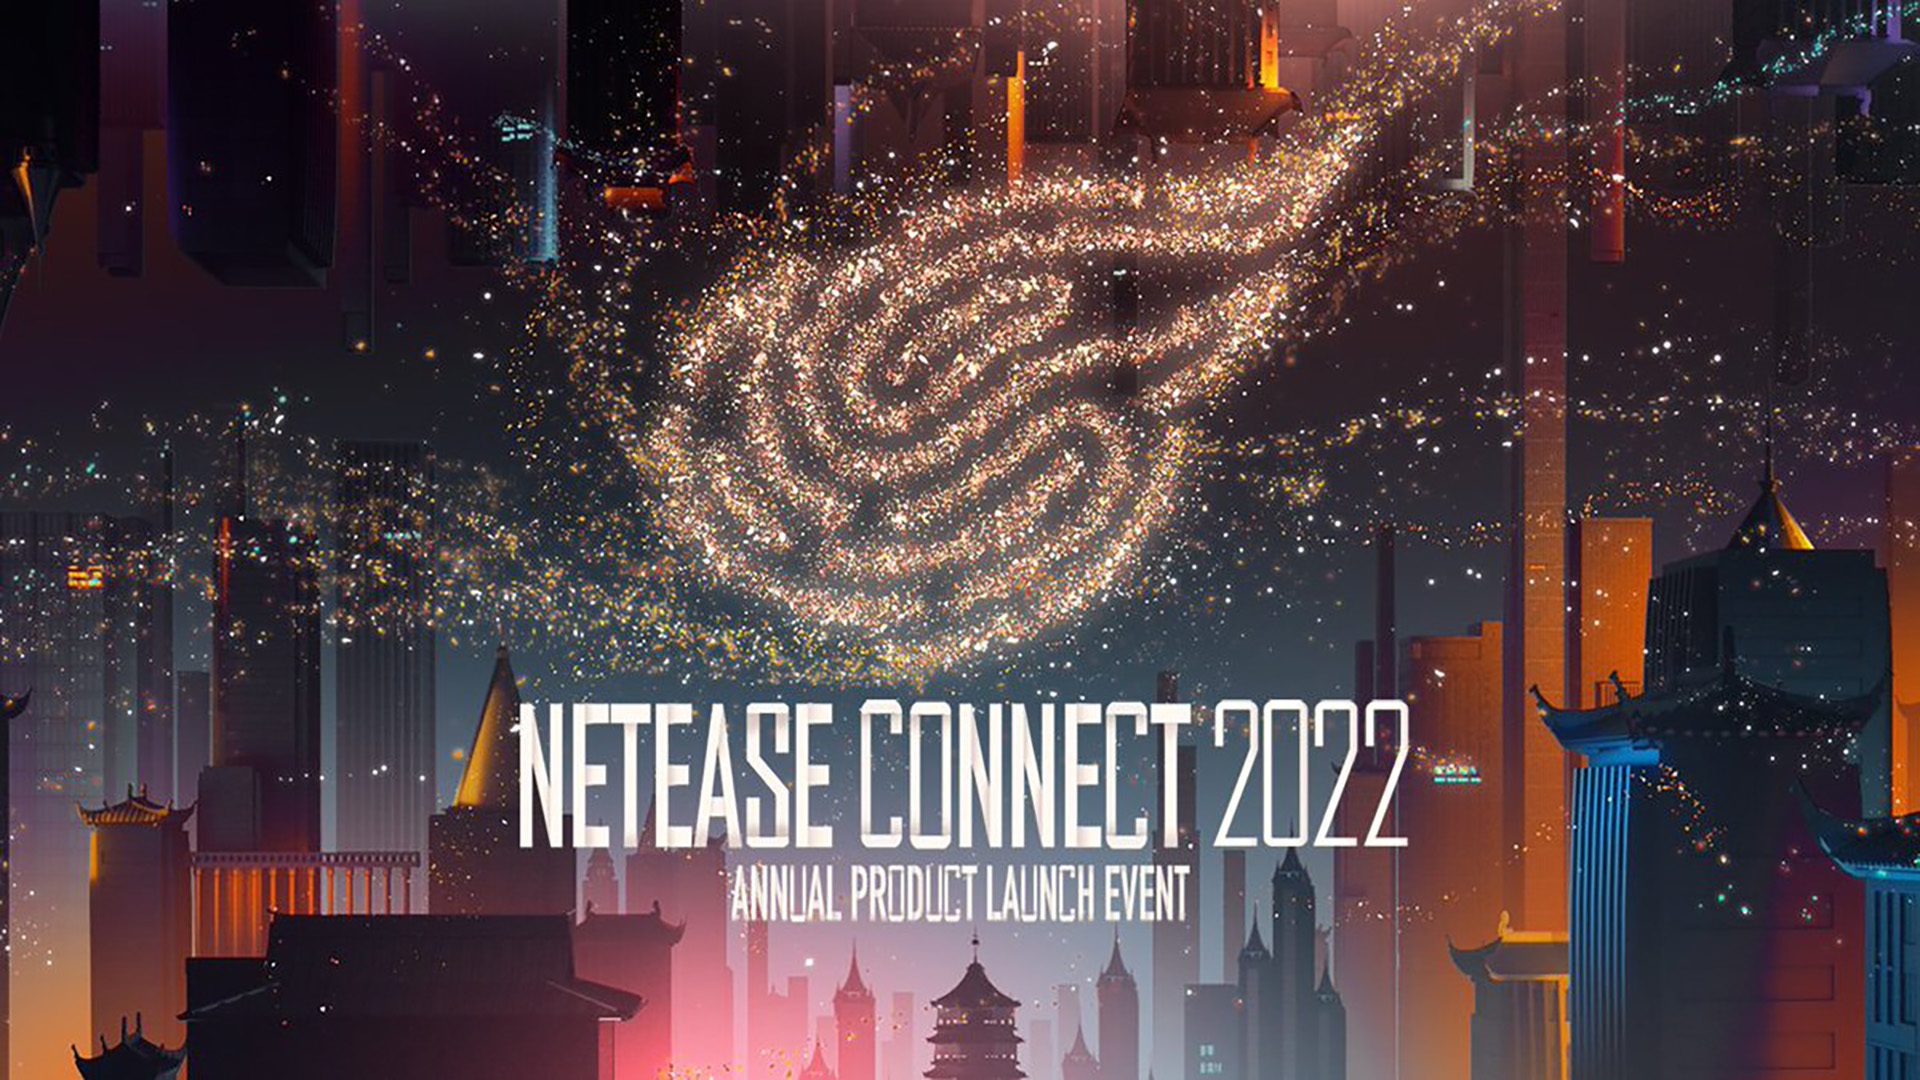 NetEase Connect 2022 Annual Product Launch Event จะจัดขึ้นในสัปดาห์หน้า